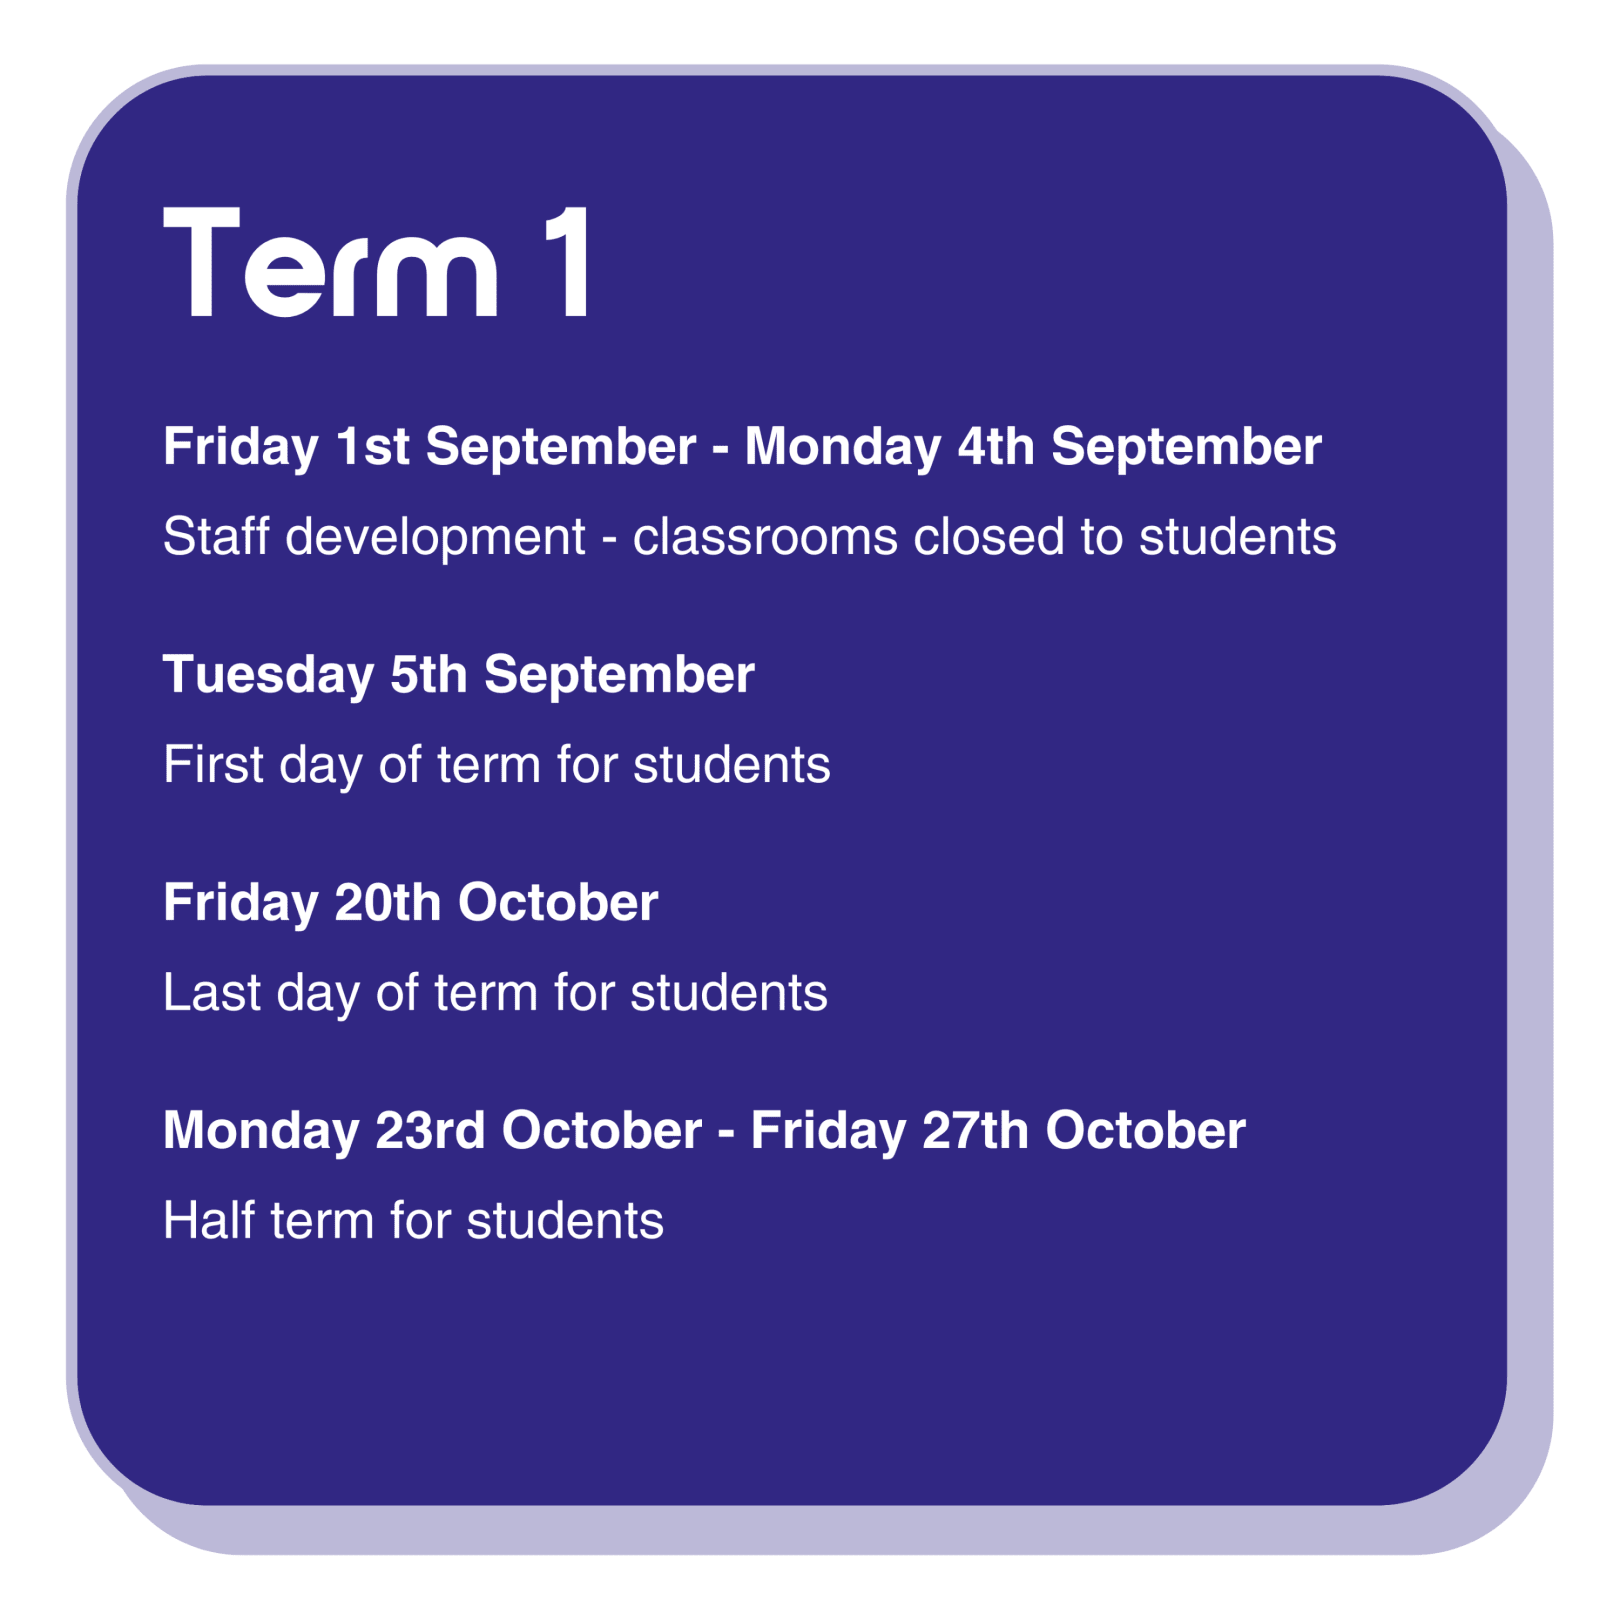 Term 1 dates information infographic with the following text: Friday 1st September - Monday 4th September are staff development days, classrooms are closed to students.  Tuesday 5th September is the first day of term for students. Friday 20th October is the last day of term for students. Monday 23rd October - Friday 27th October is half term for students.